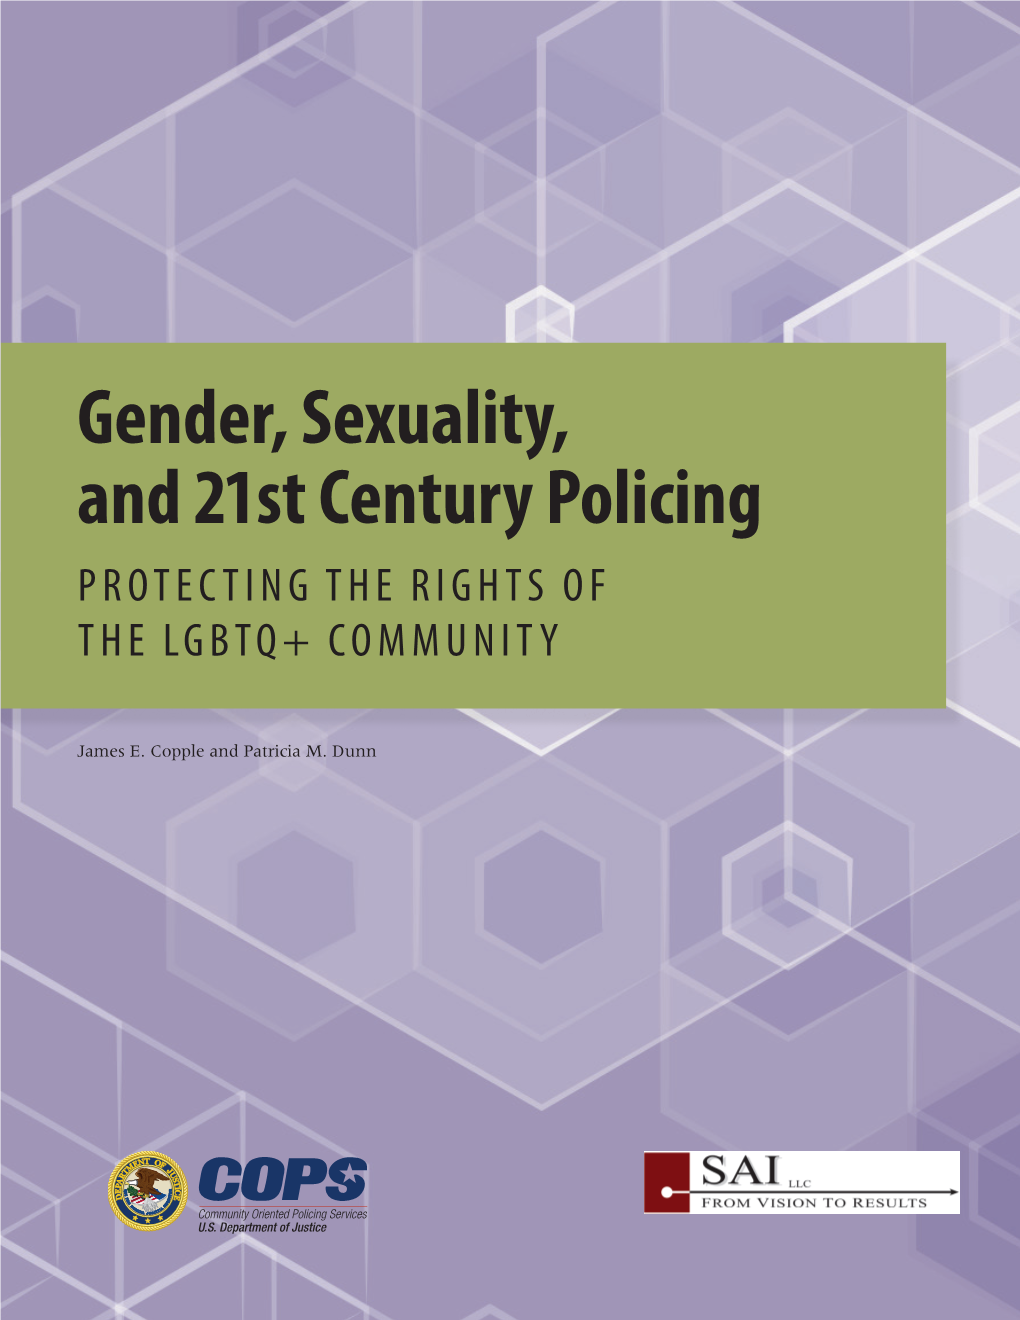 Gender, Sexuality, and 21St Century Policing PROTECTING the RIGHTS of the LGBTQ+ COMMUNITY